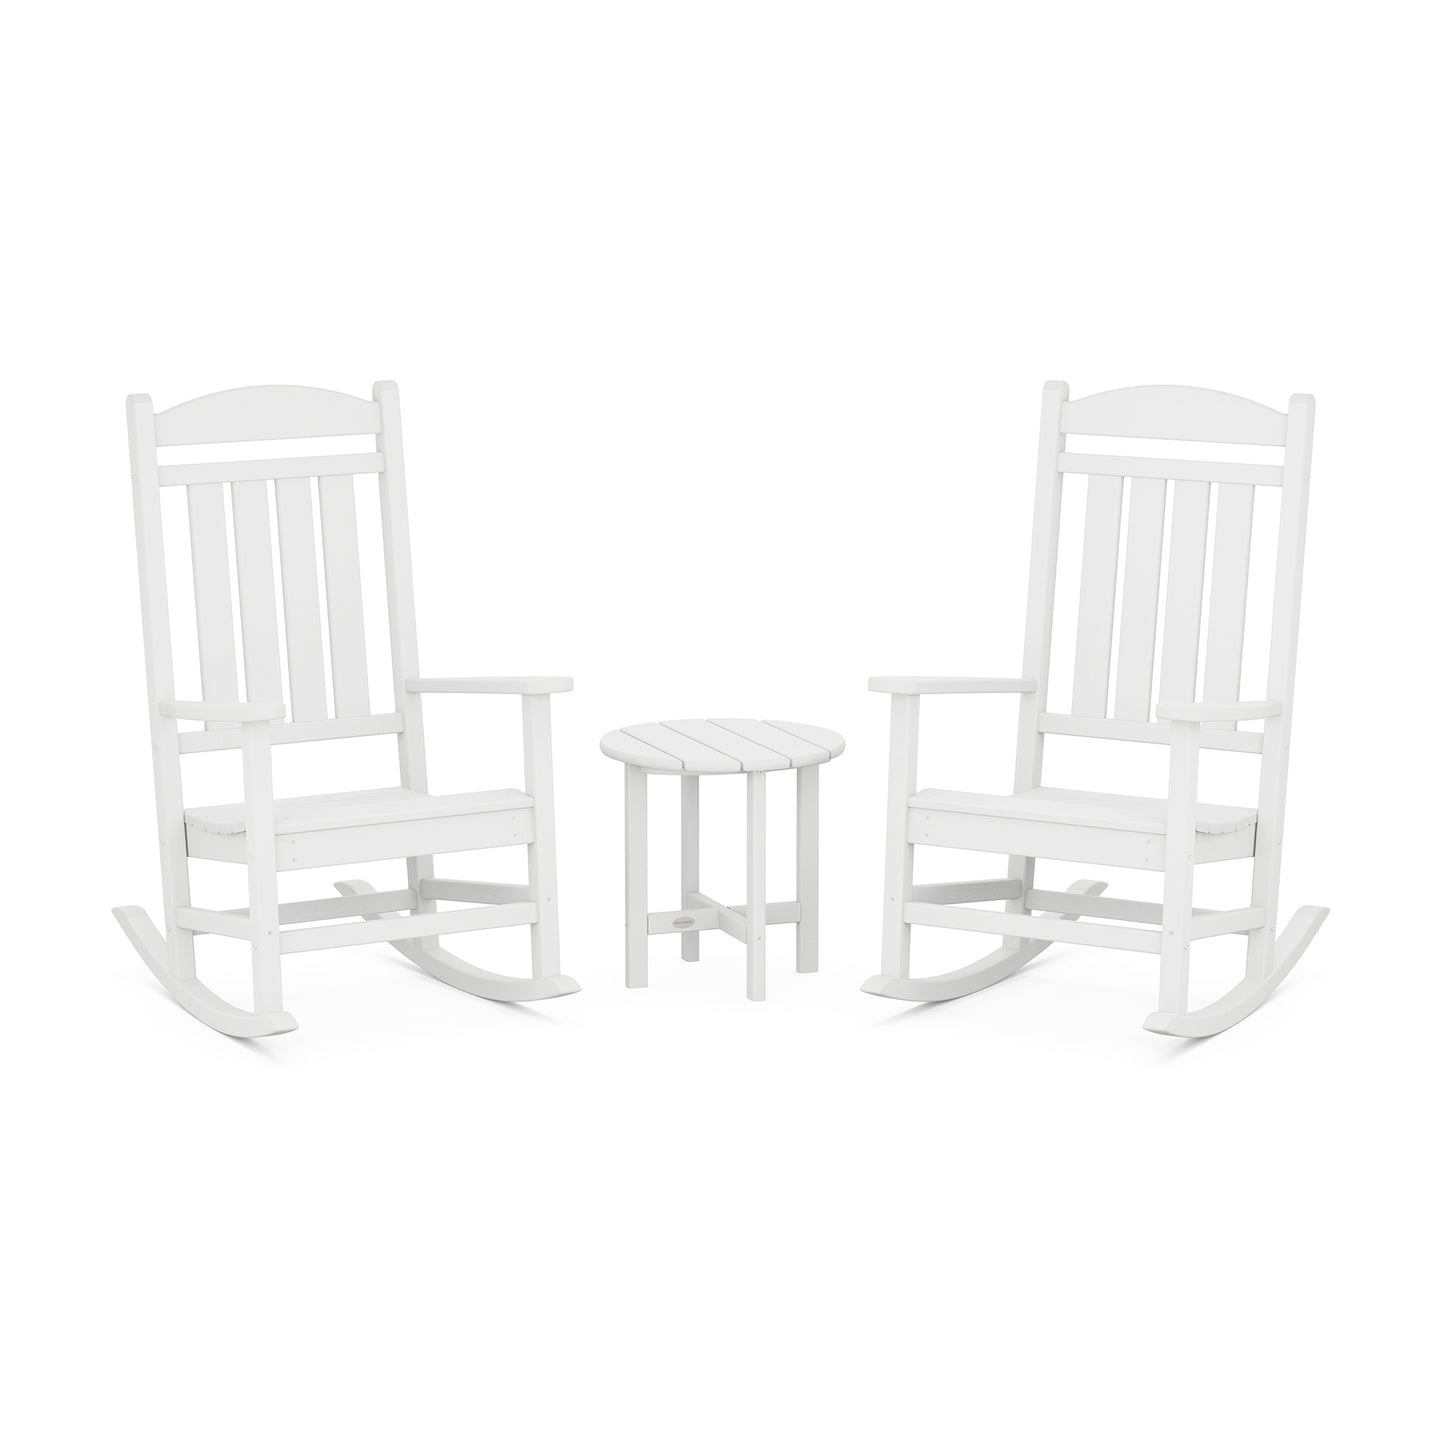 Two white POLYWOOD Presidential 3-Piece Rocker Sets facing each other, with a small round table between them, all set on a plain white background.